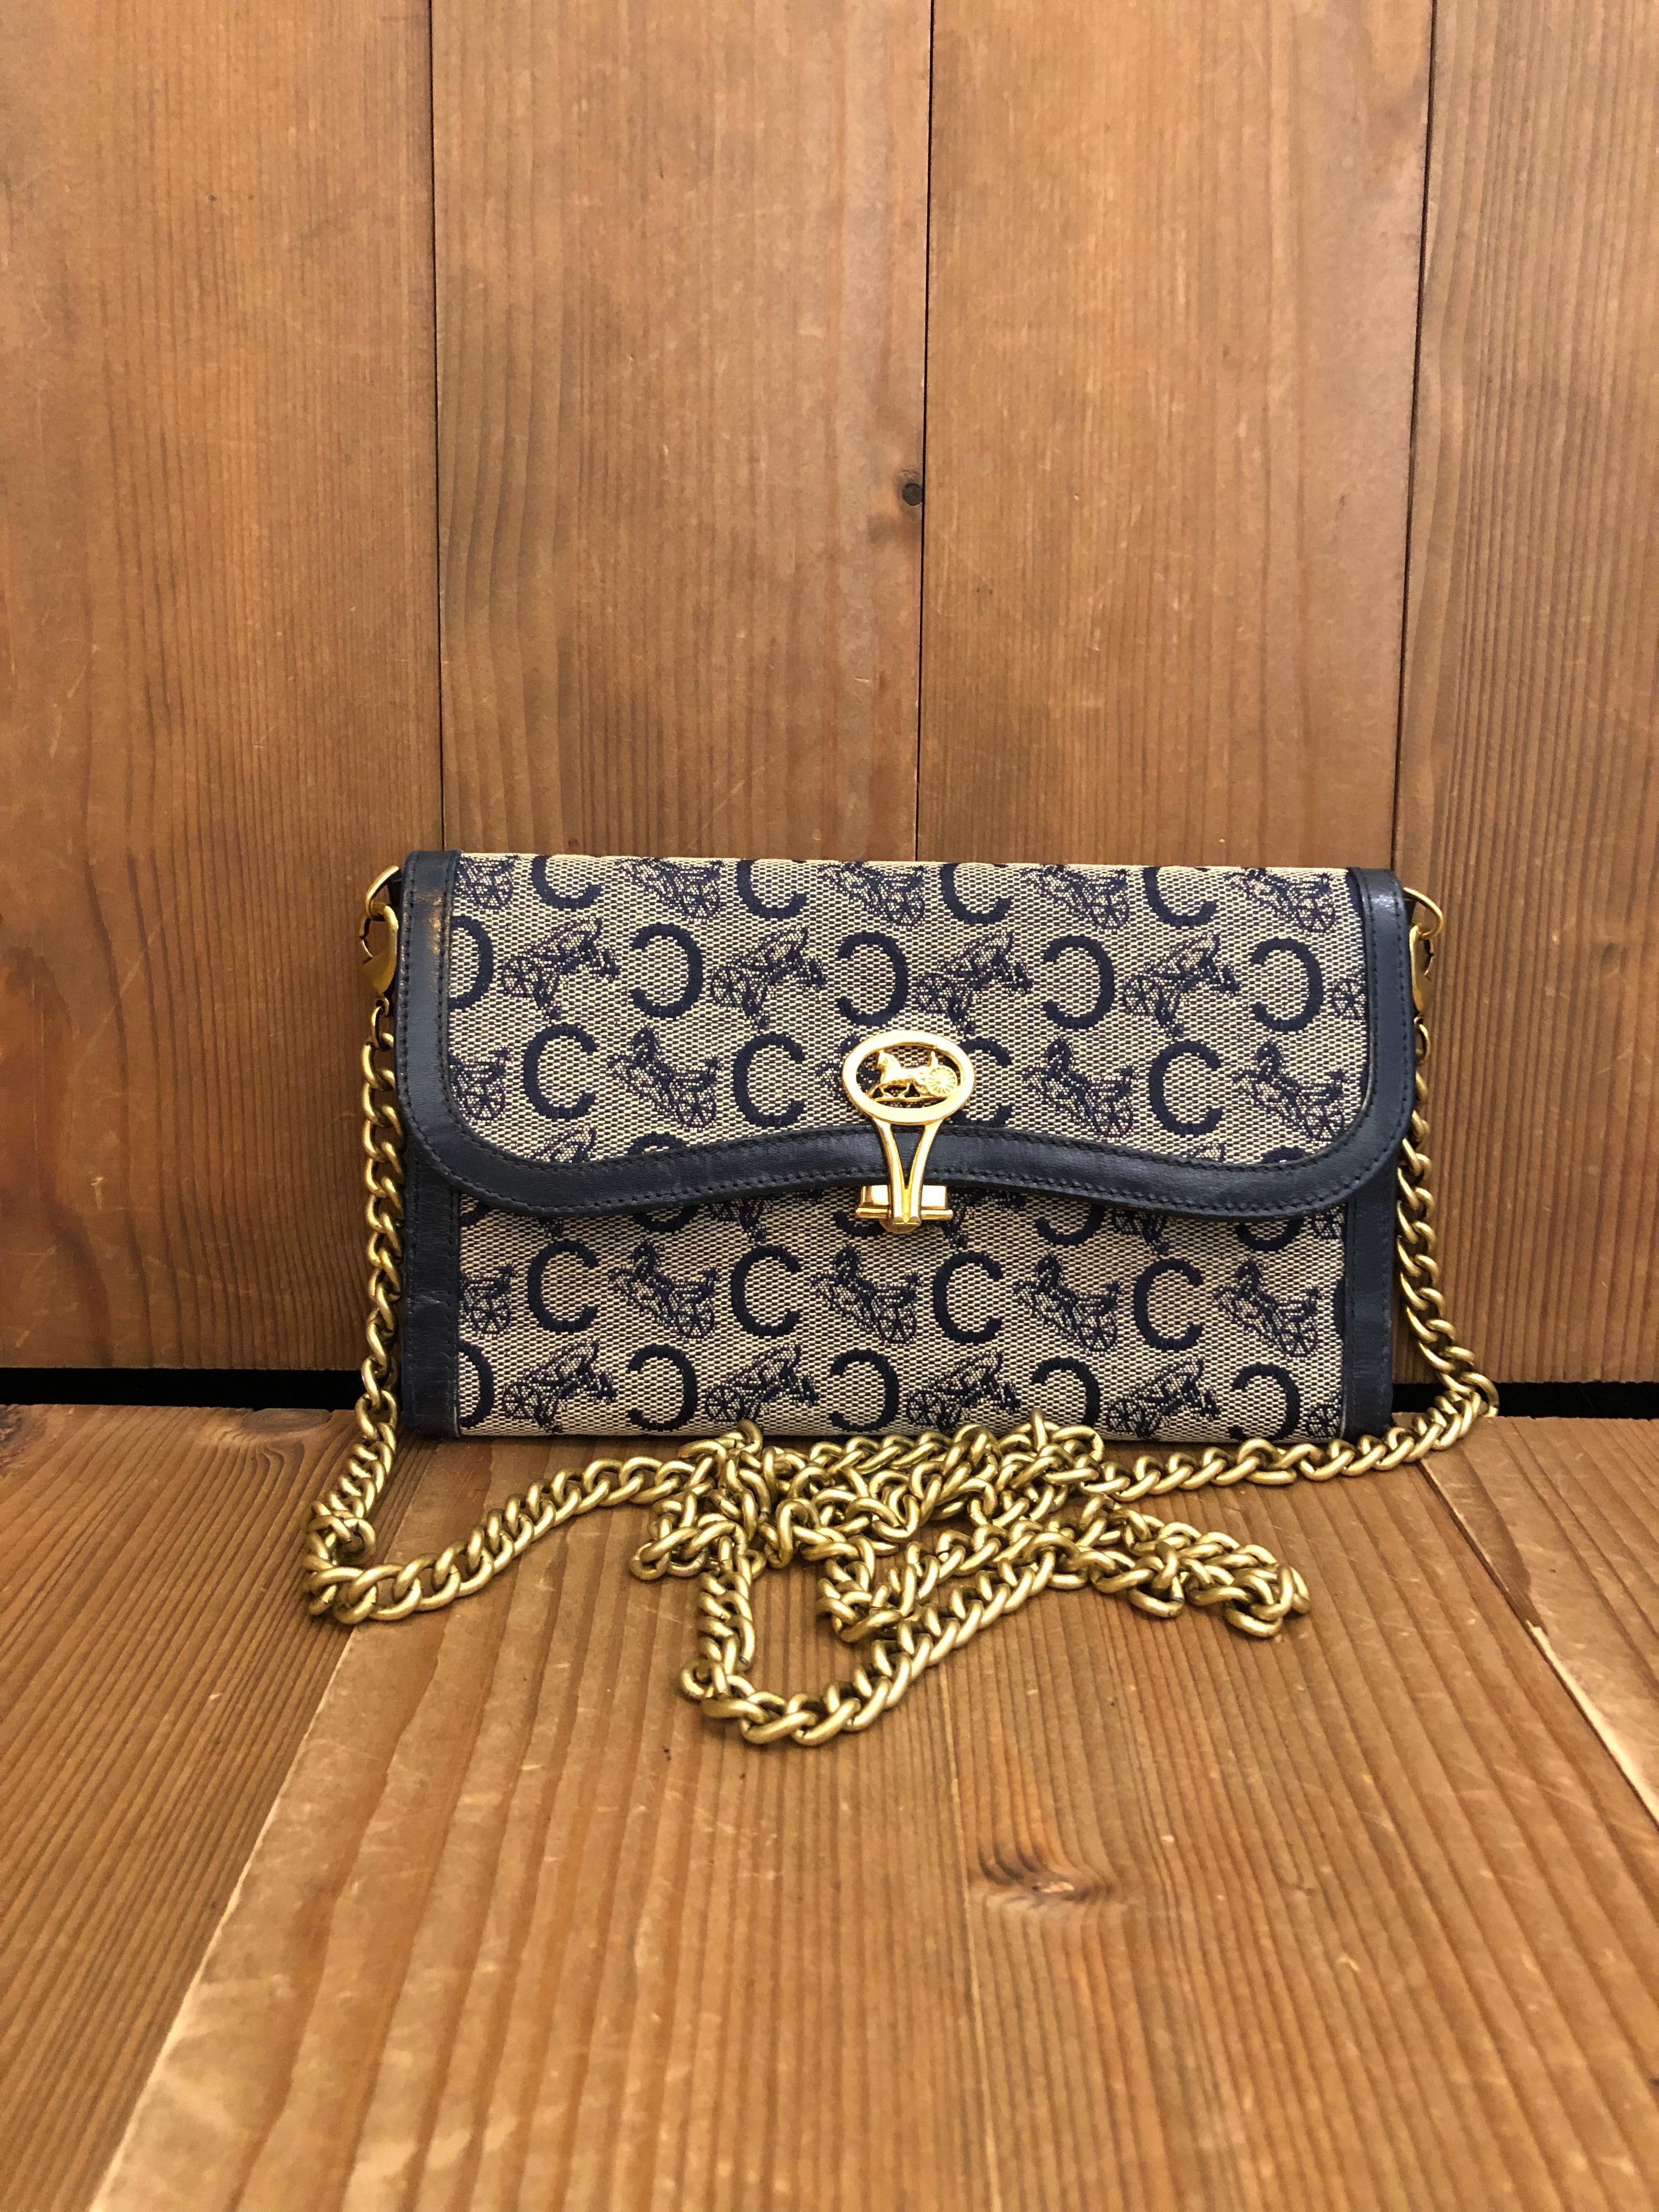 This vintage CELINE tri-fold long wallet is crafted of Celine monogram jacquard and leather in navy. Celine gold toned buckle open to an all leather interior in navy featuring 4 general pockets and 1 coin pocket. With the gold toned chain and